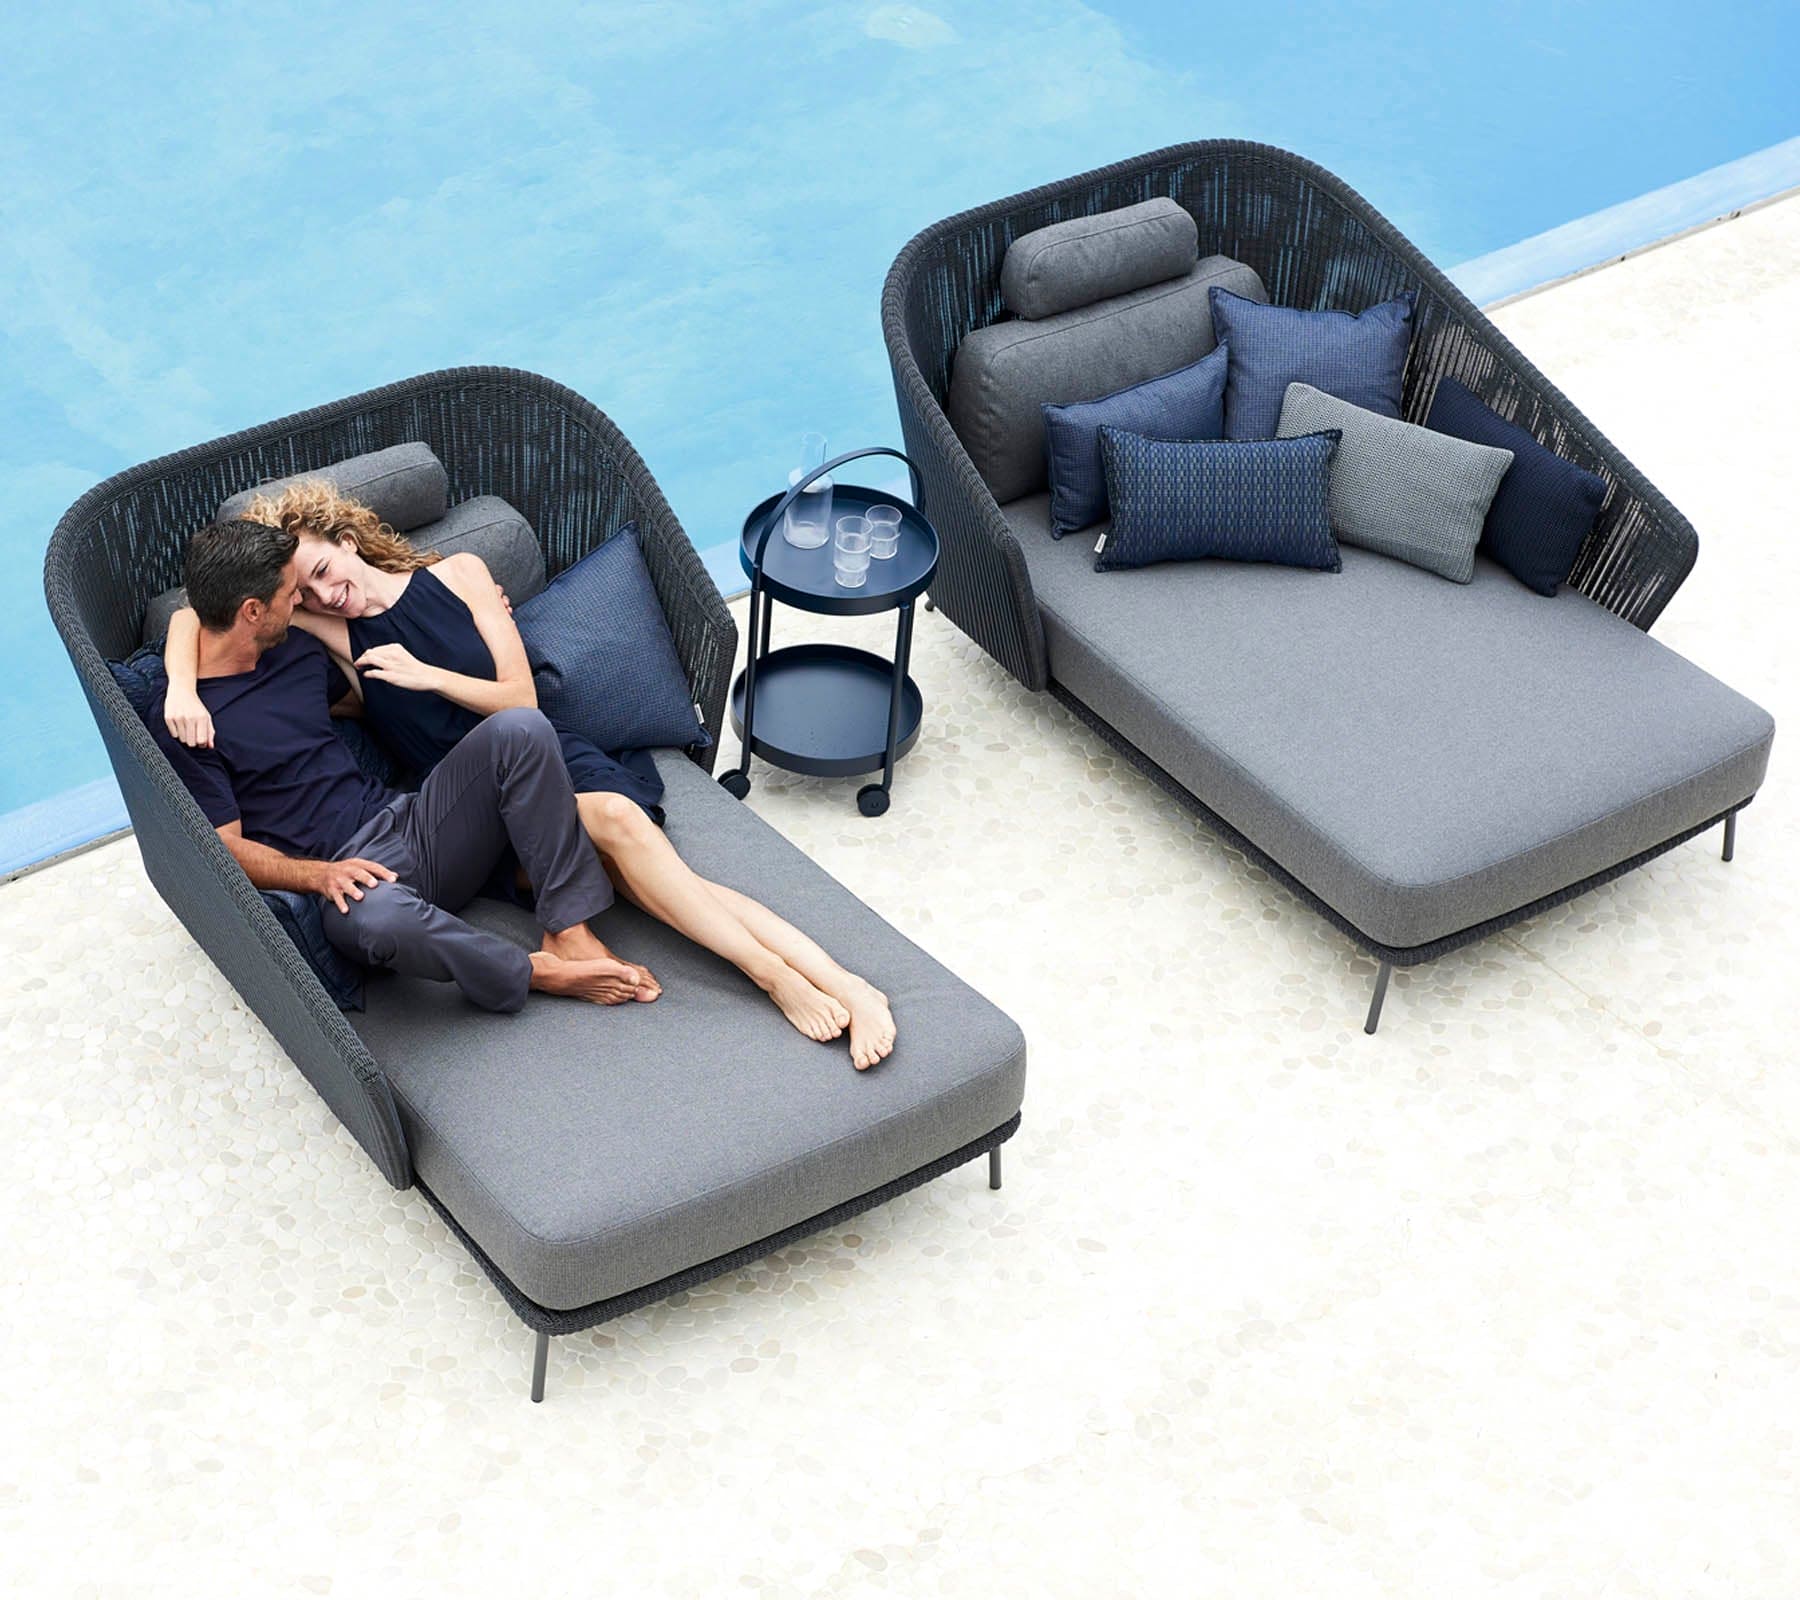 Boxhill's Mega Modern Outdoor Right Module Daybed lifestyle image with Mega Modern Outdoor Left Module Daybed and a couple sitting down showing affection beside the pool